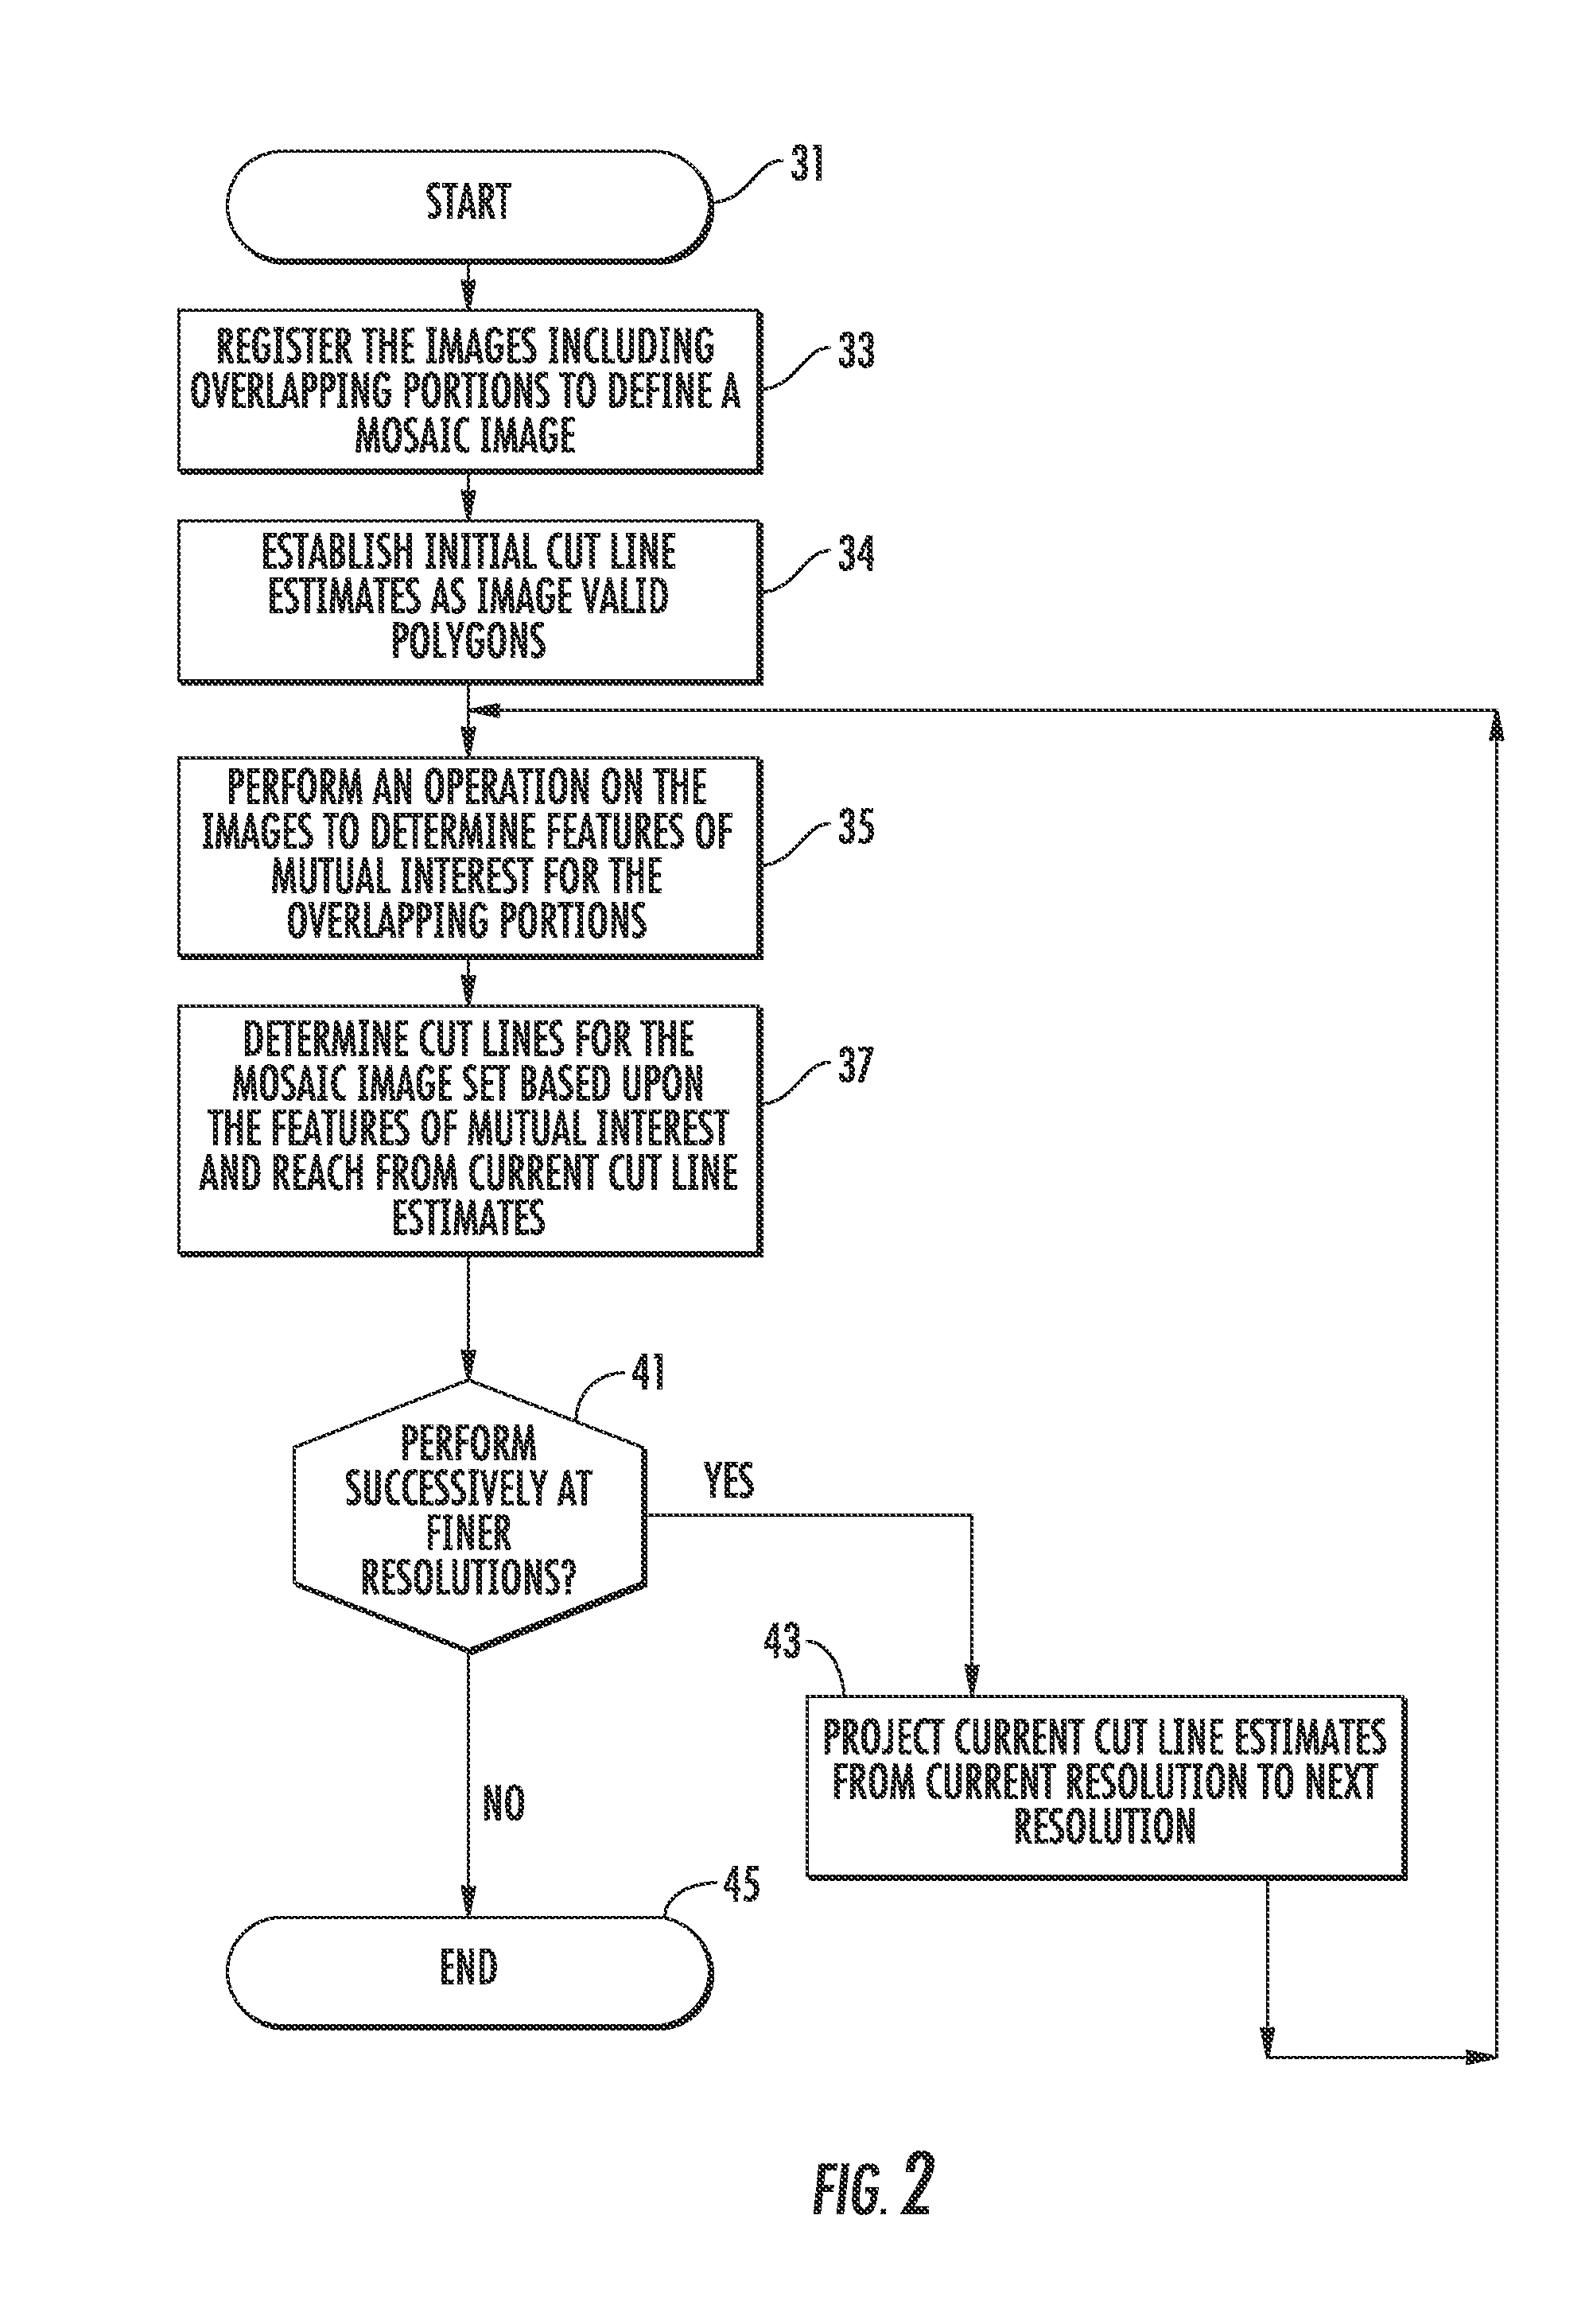 Image processing device for determining cut lines and related methods